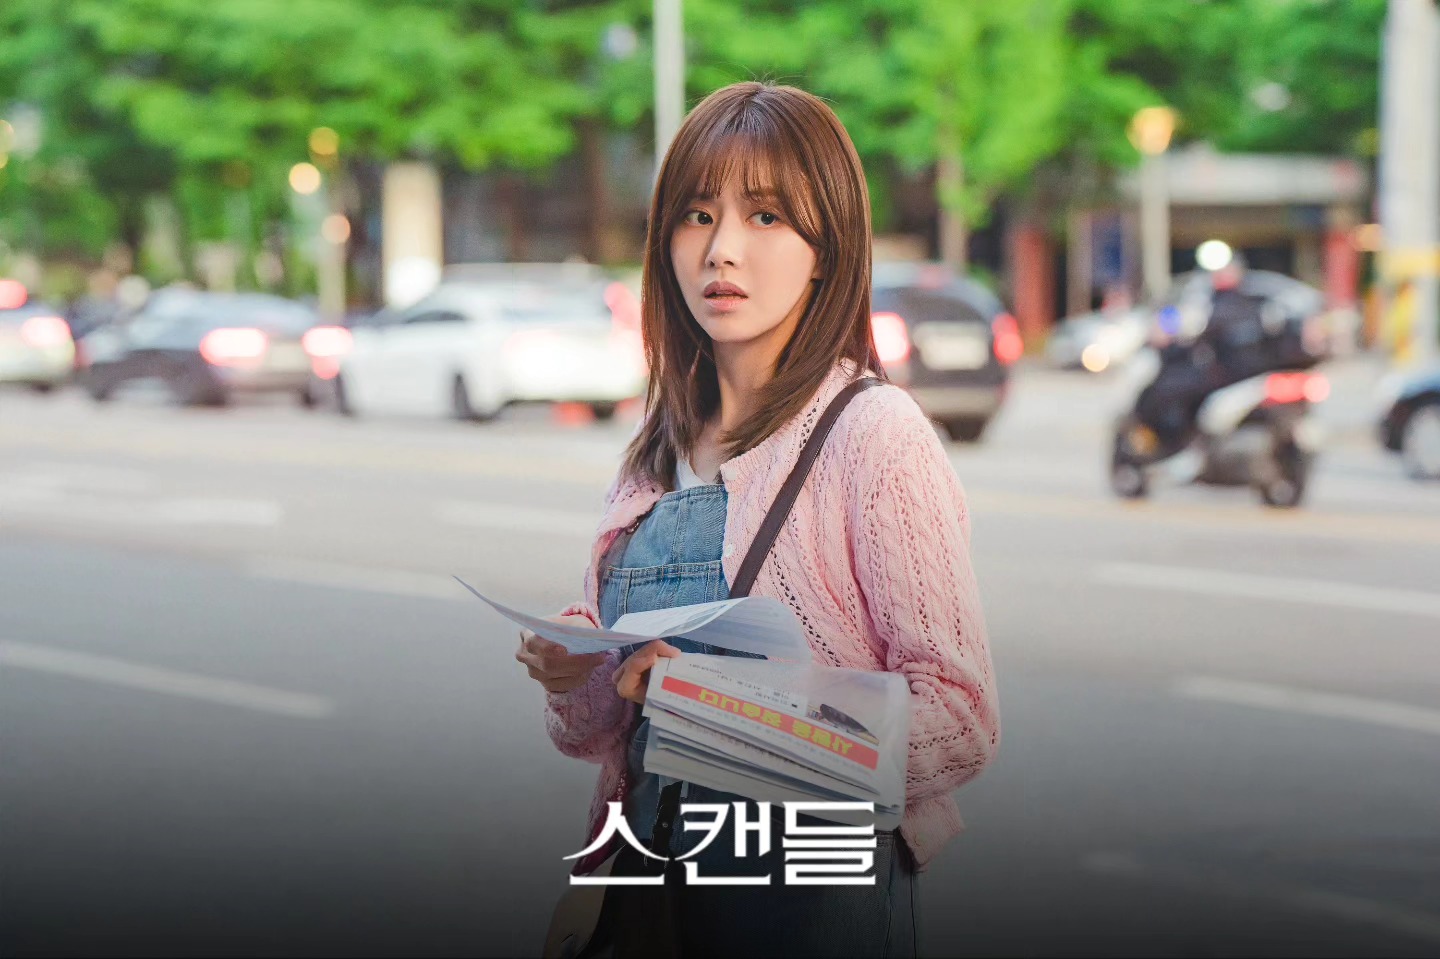 Han Bo Reum Is A Screenwriter Who Seeks Revenge On Her Stepmother In Upcoming Drama 